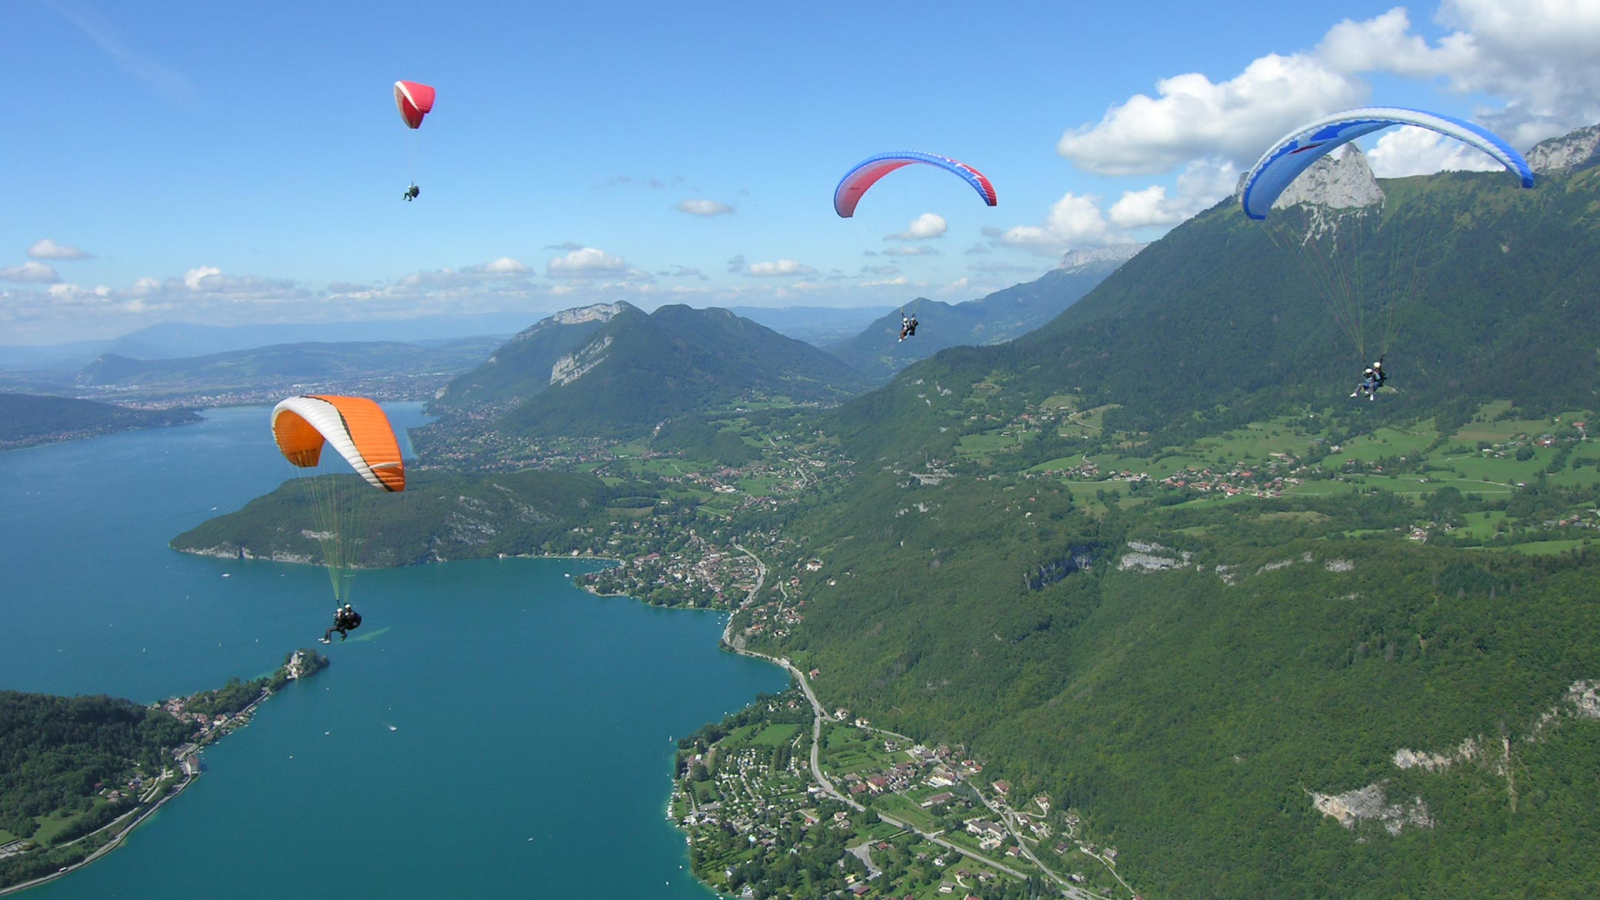 Paragliders above lake Annecy